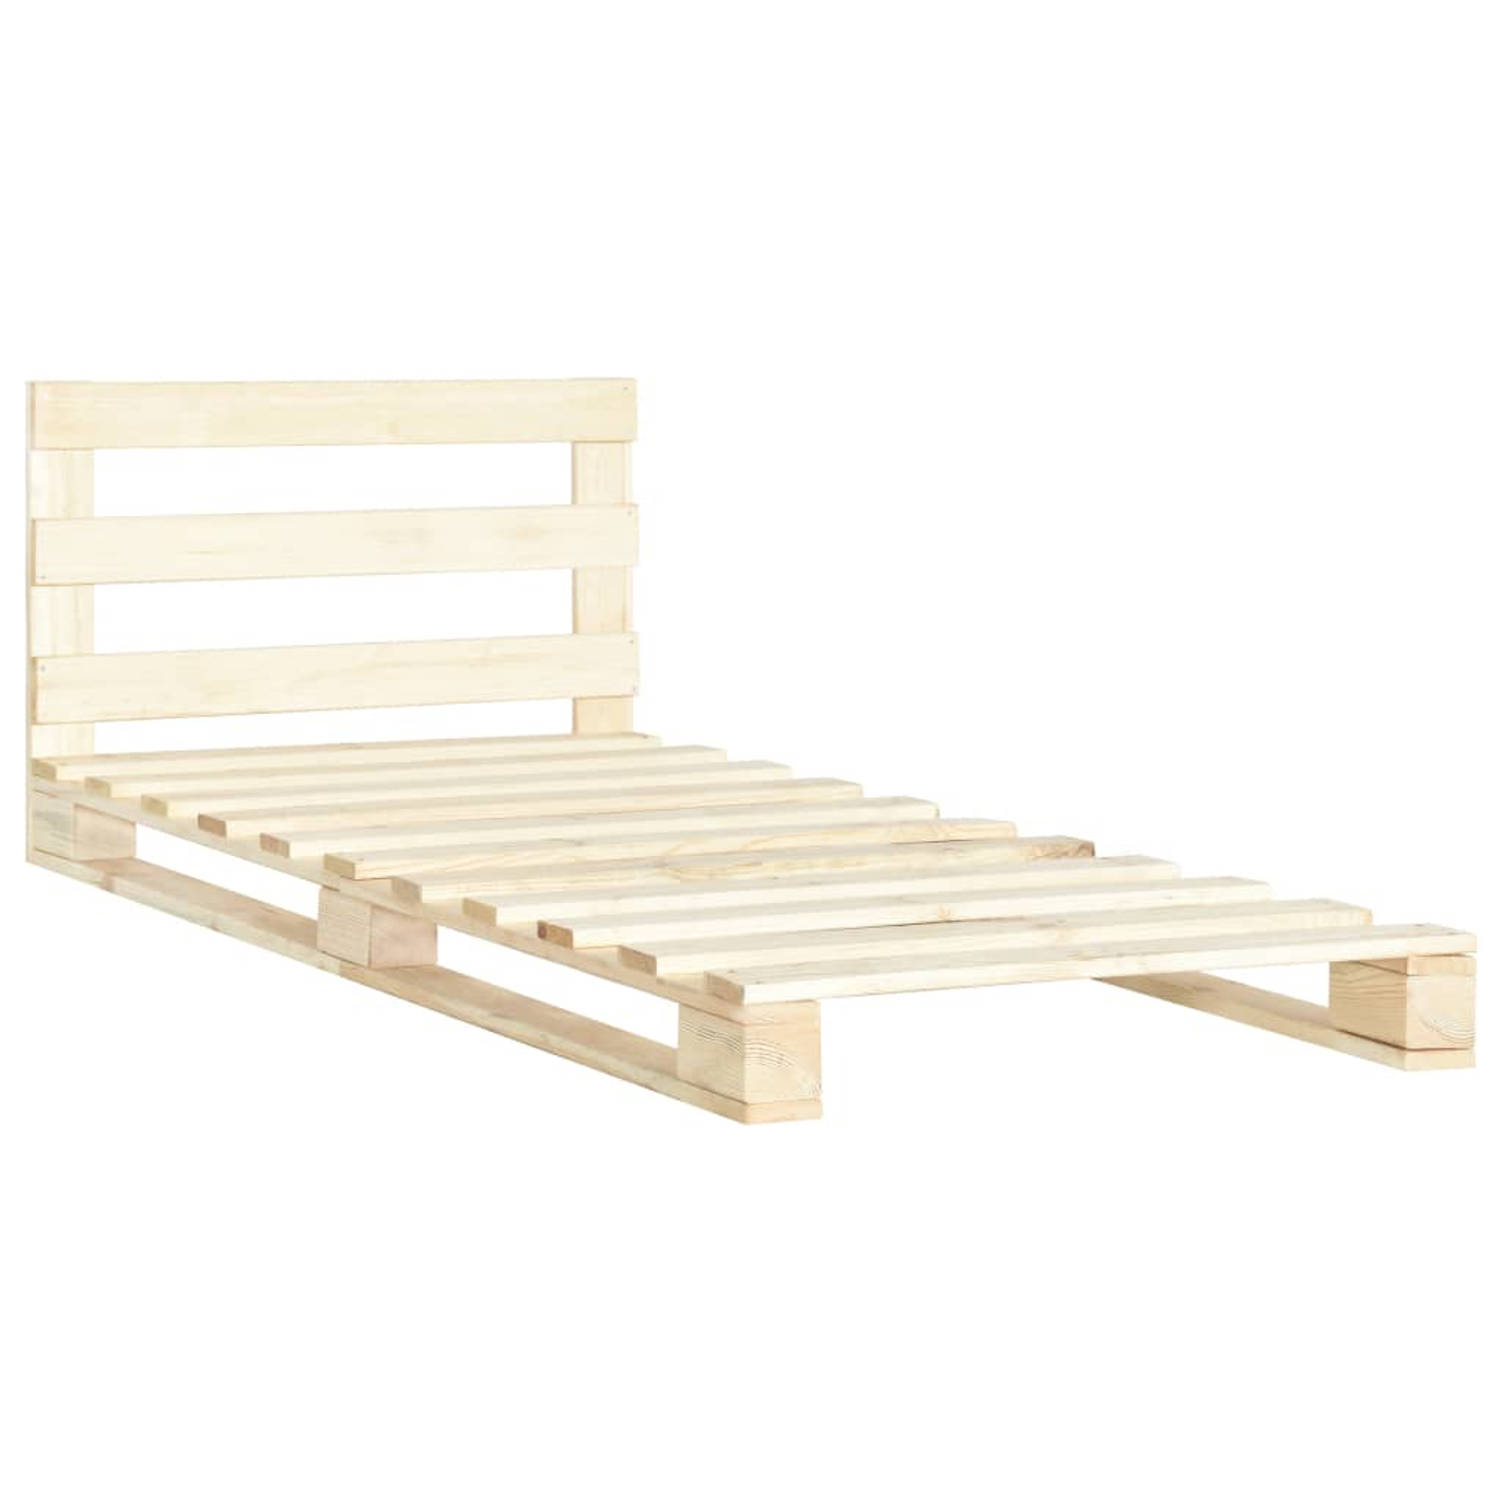 The Living Store Bedframe pallet massief grenenhout 100x200 cm - Bed